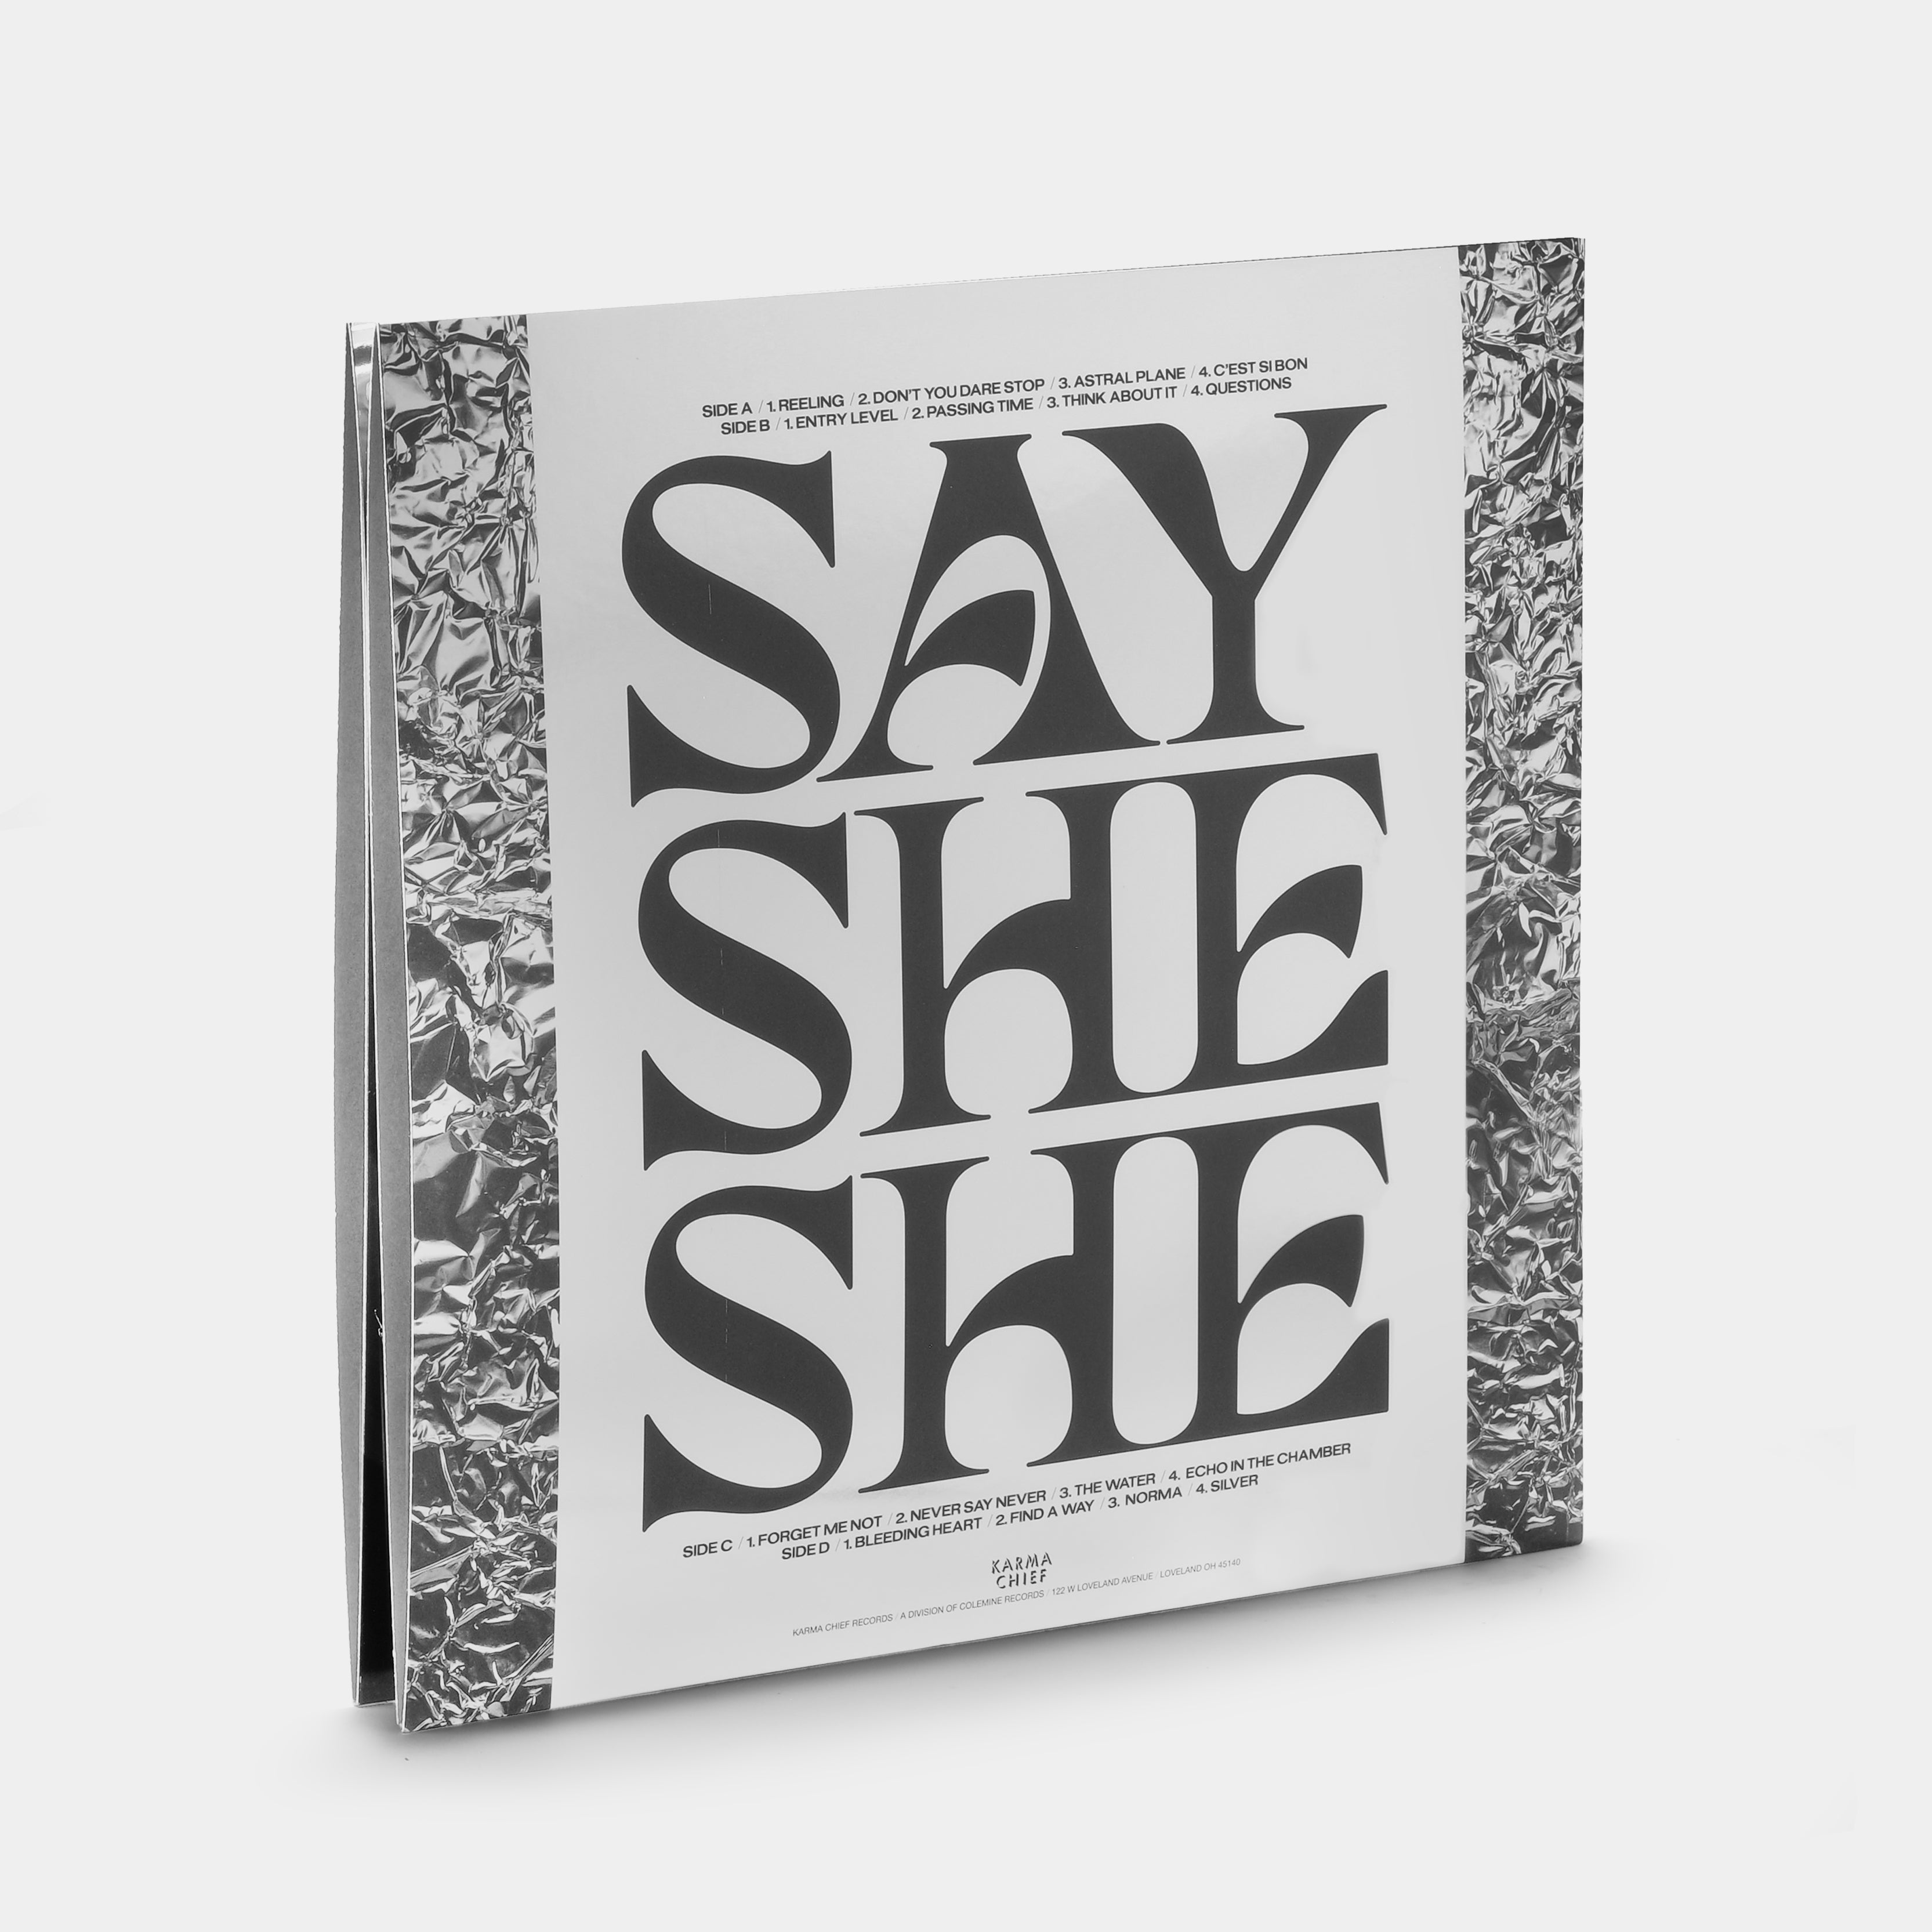 Say She She – Silver 2xLP Transparent Pink Vinyl Record